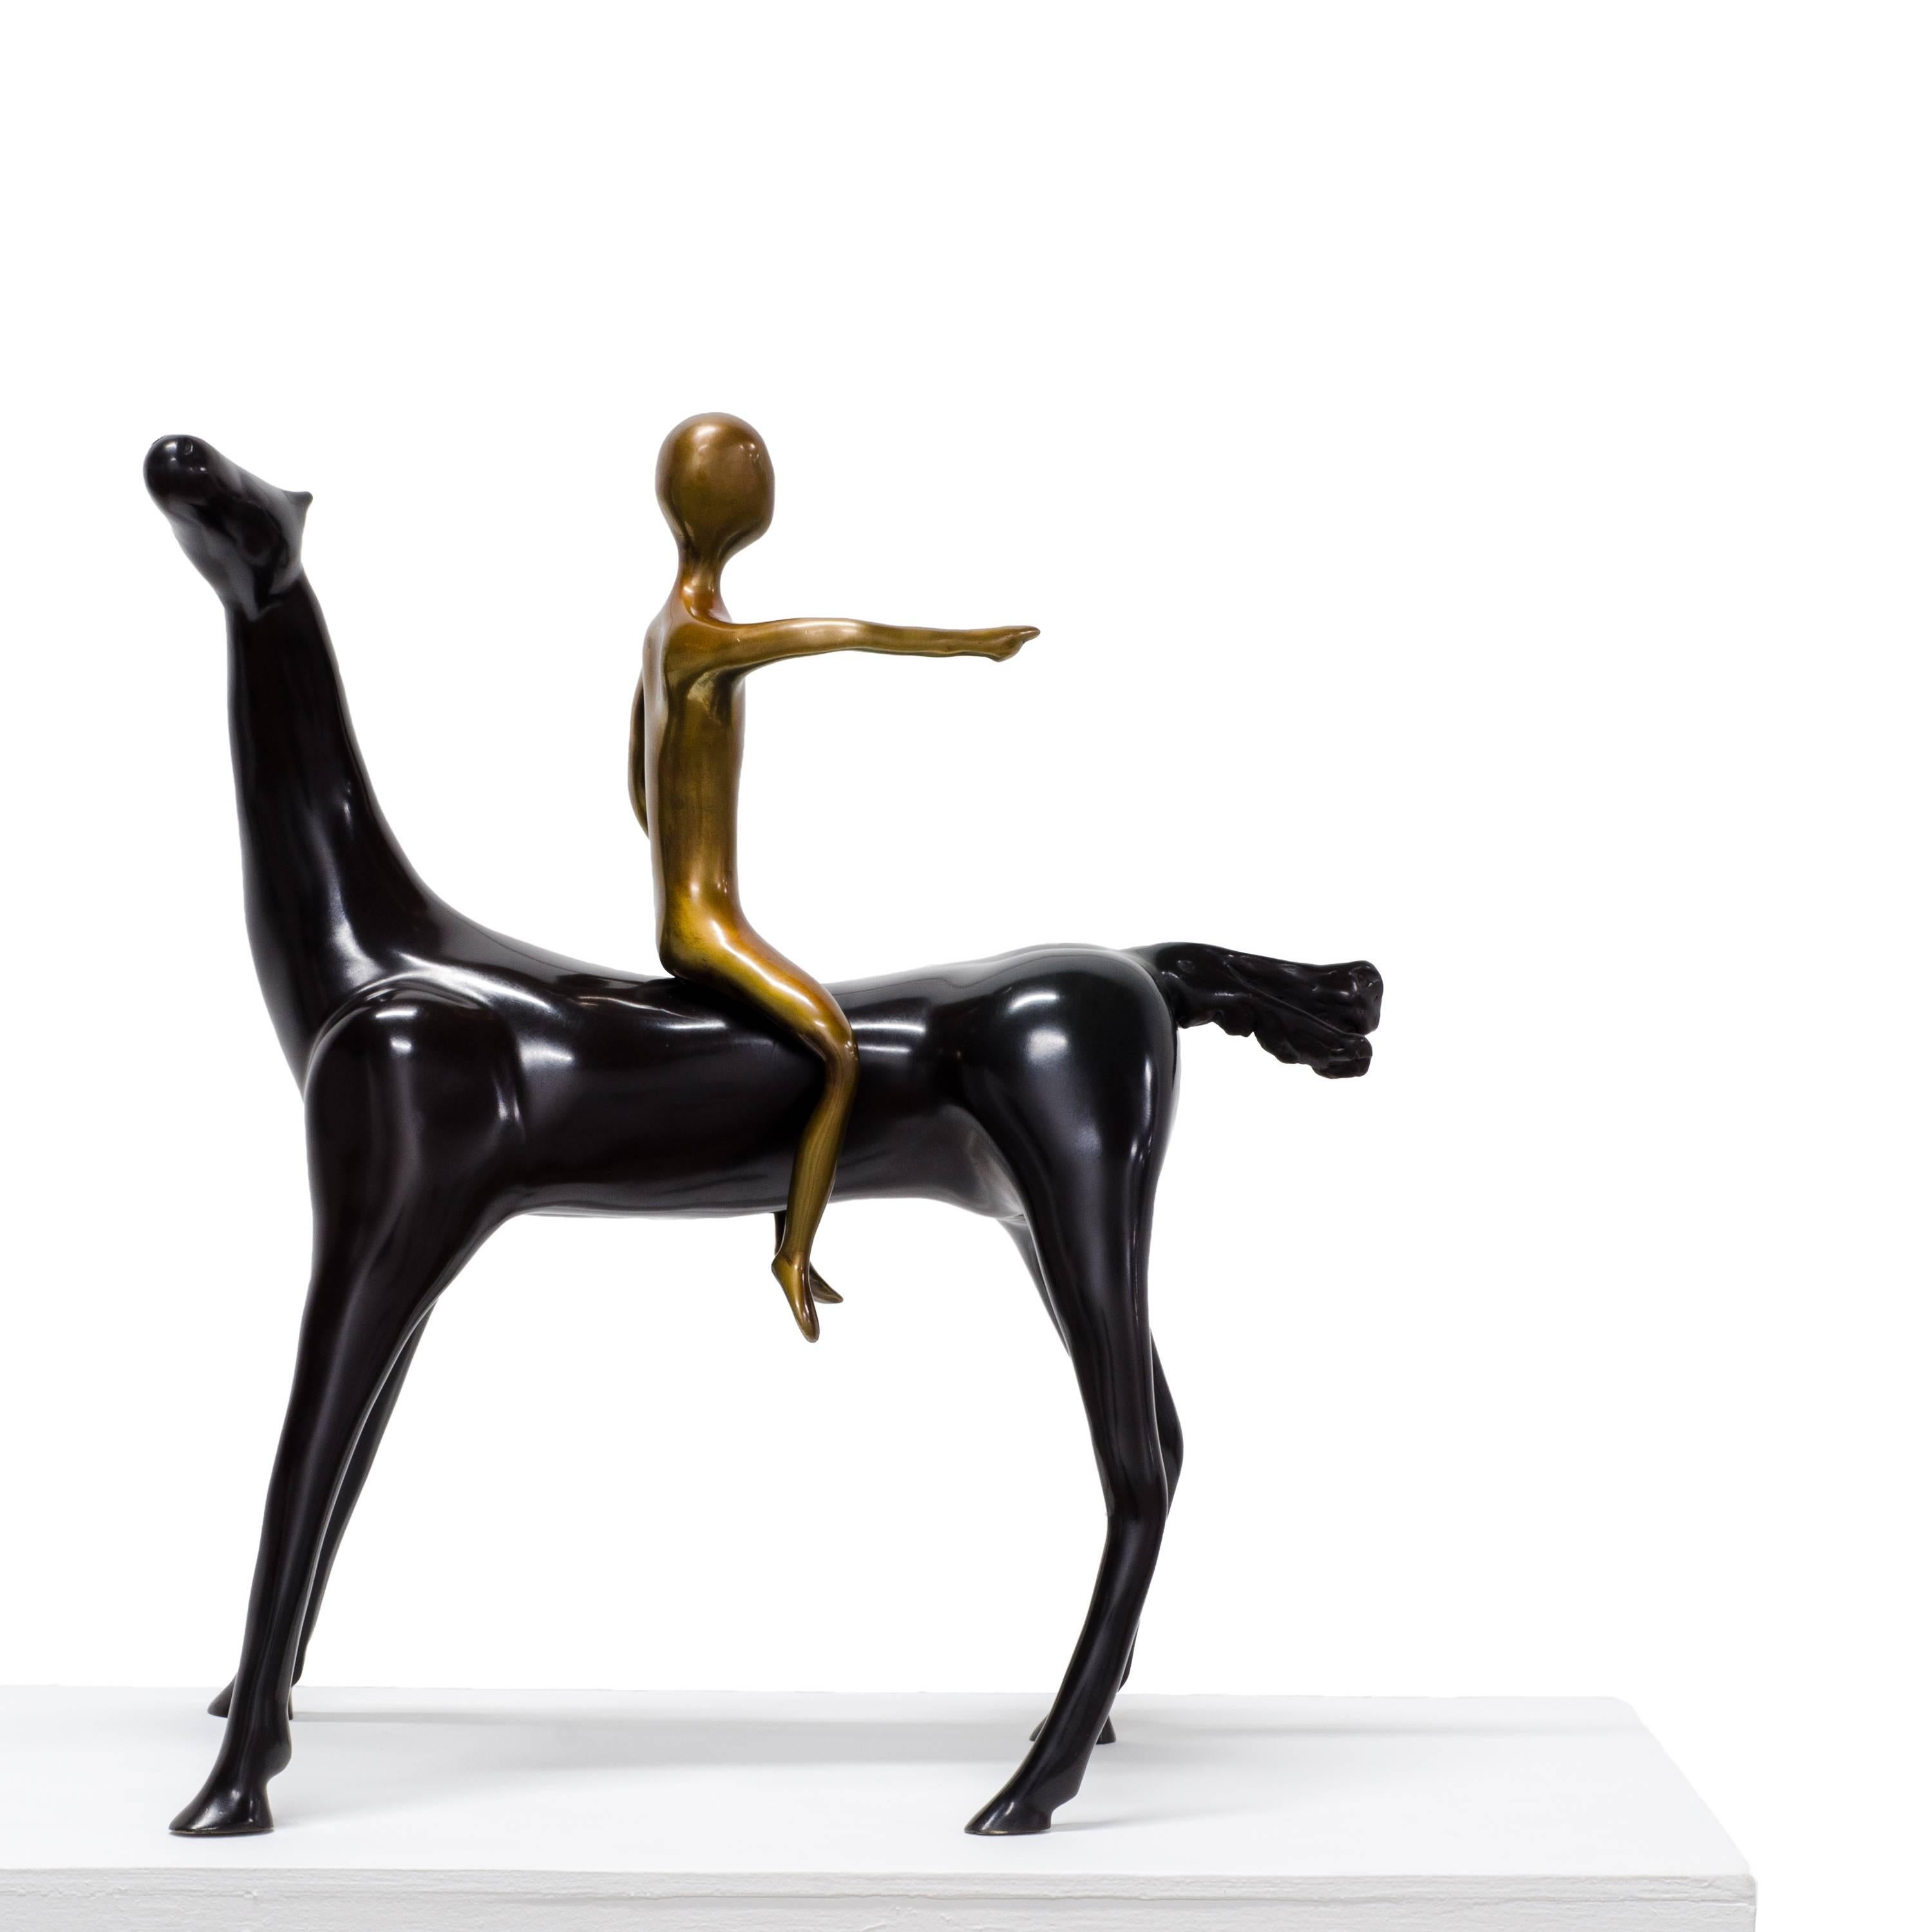 That Way! The disagreement of the horse and the rider. - Abstract Sculpture by Beatriz Gerenstein